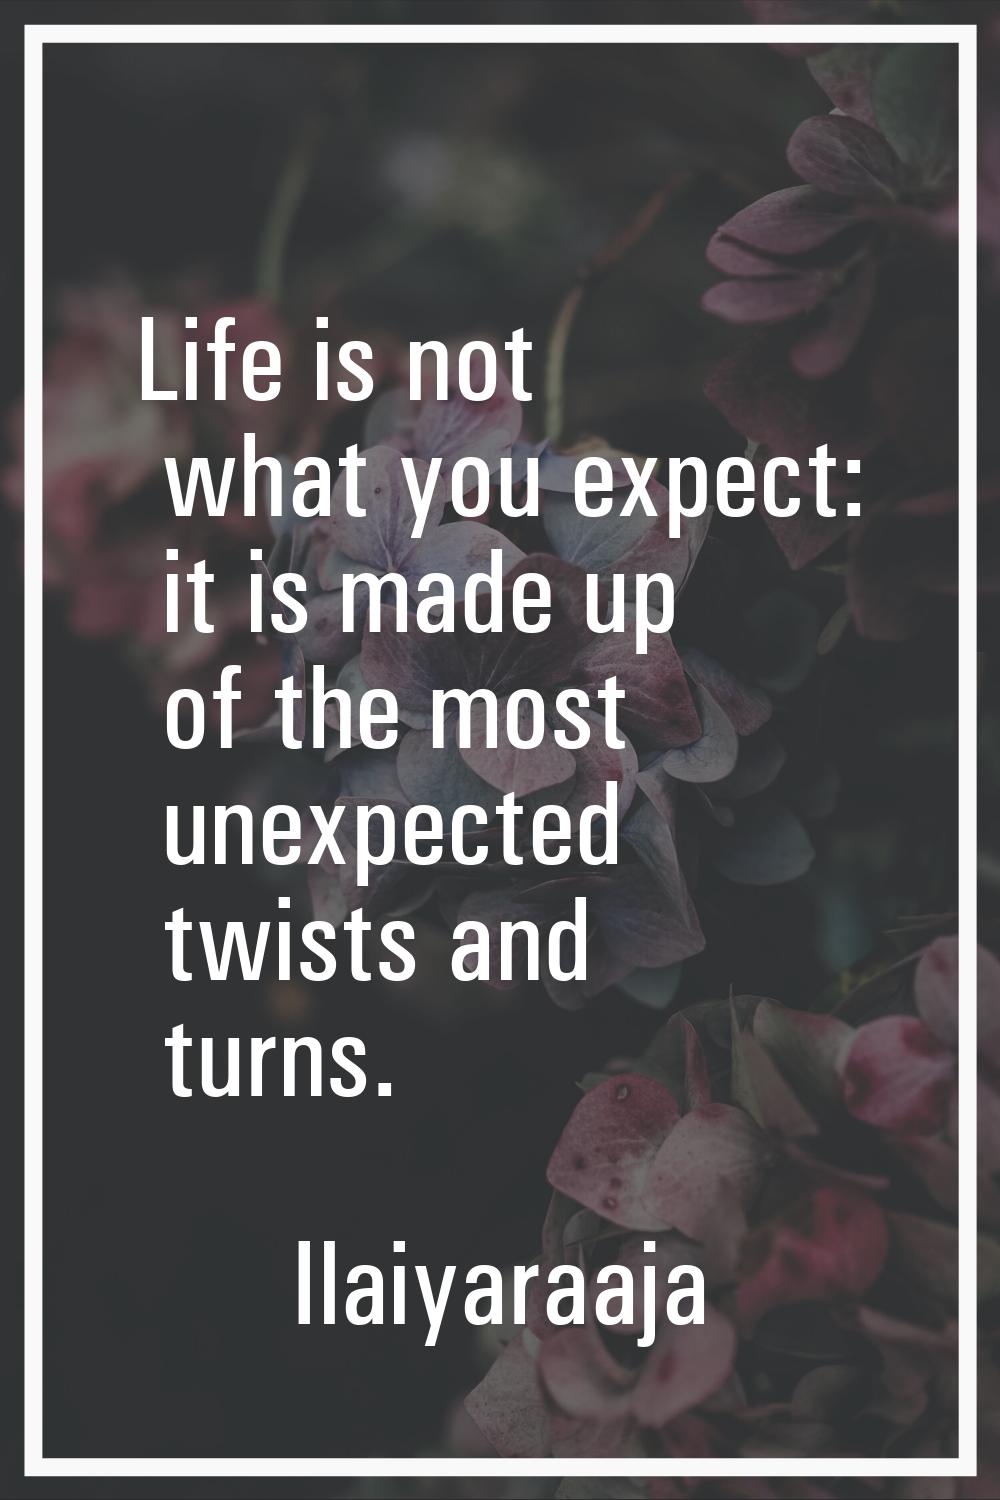 Life is not what you expect: it is made up of the most unexpected twists and turns.